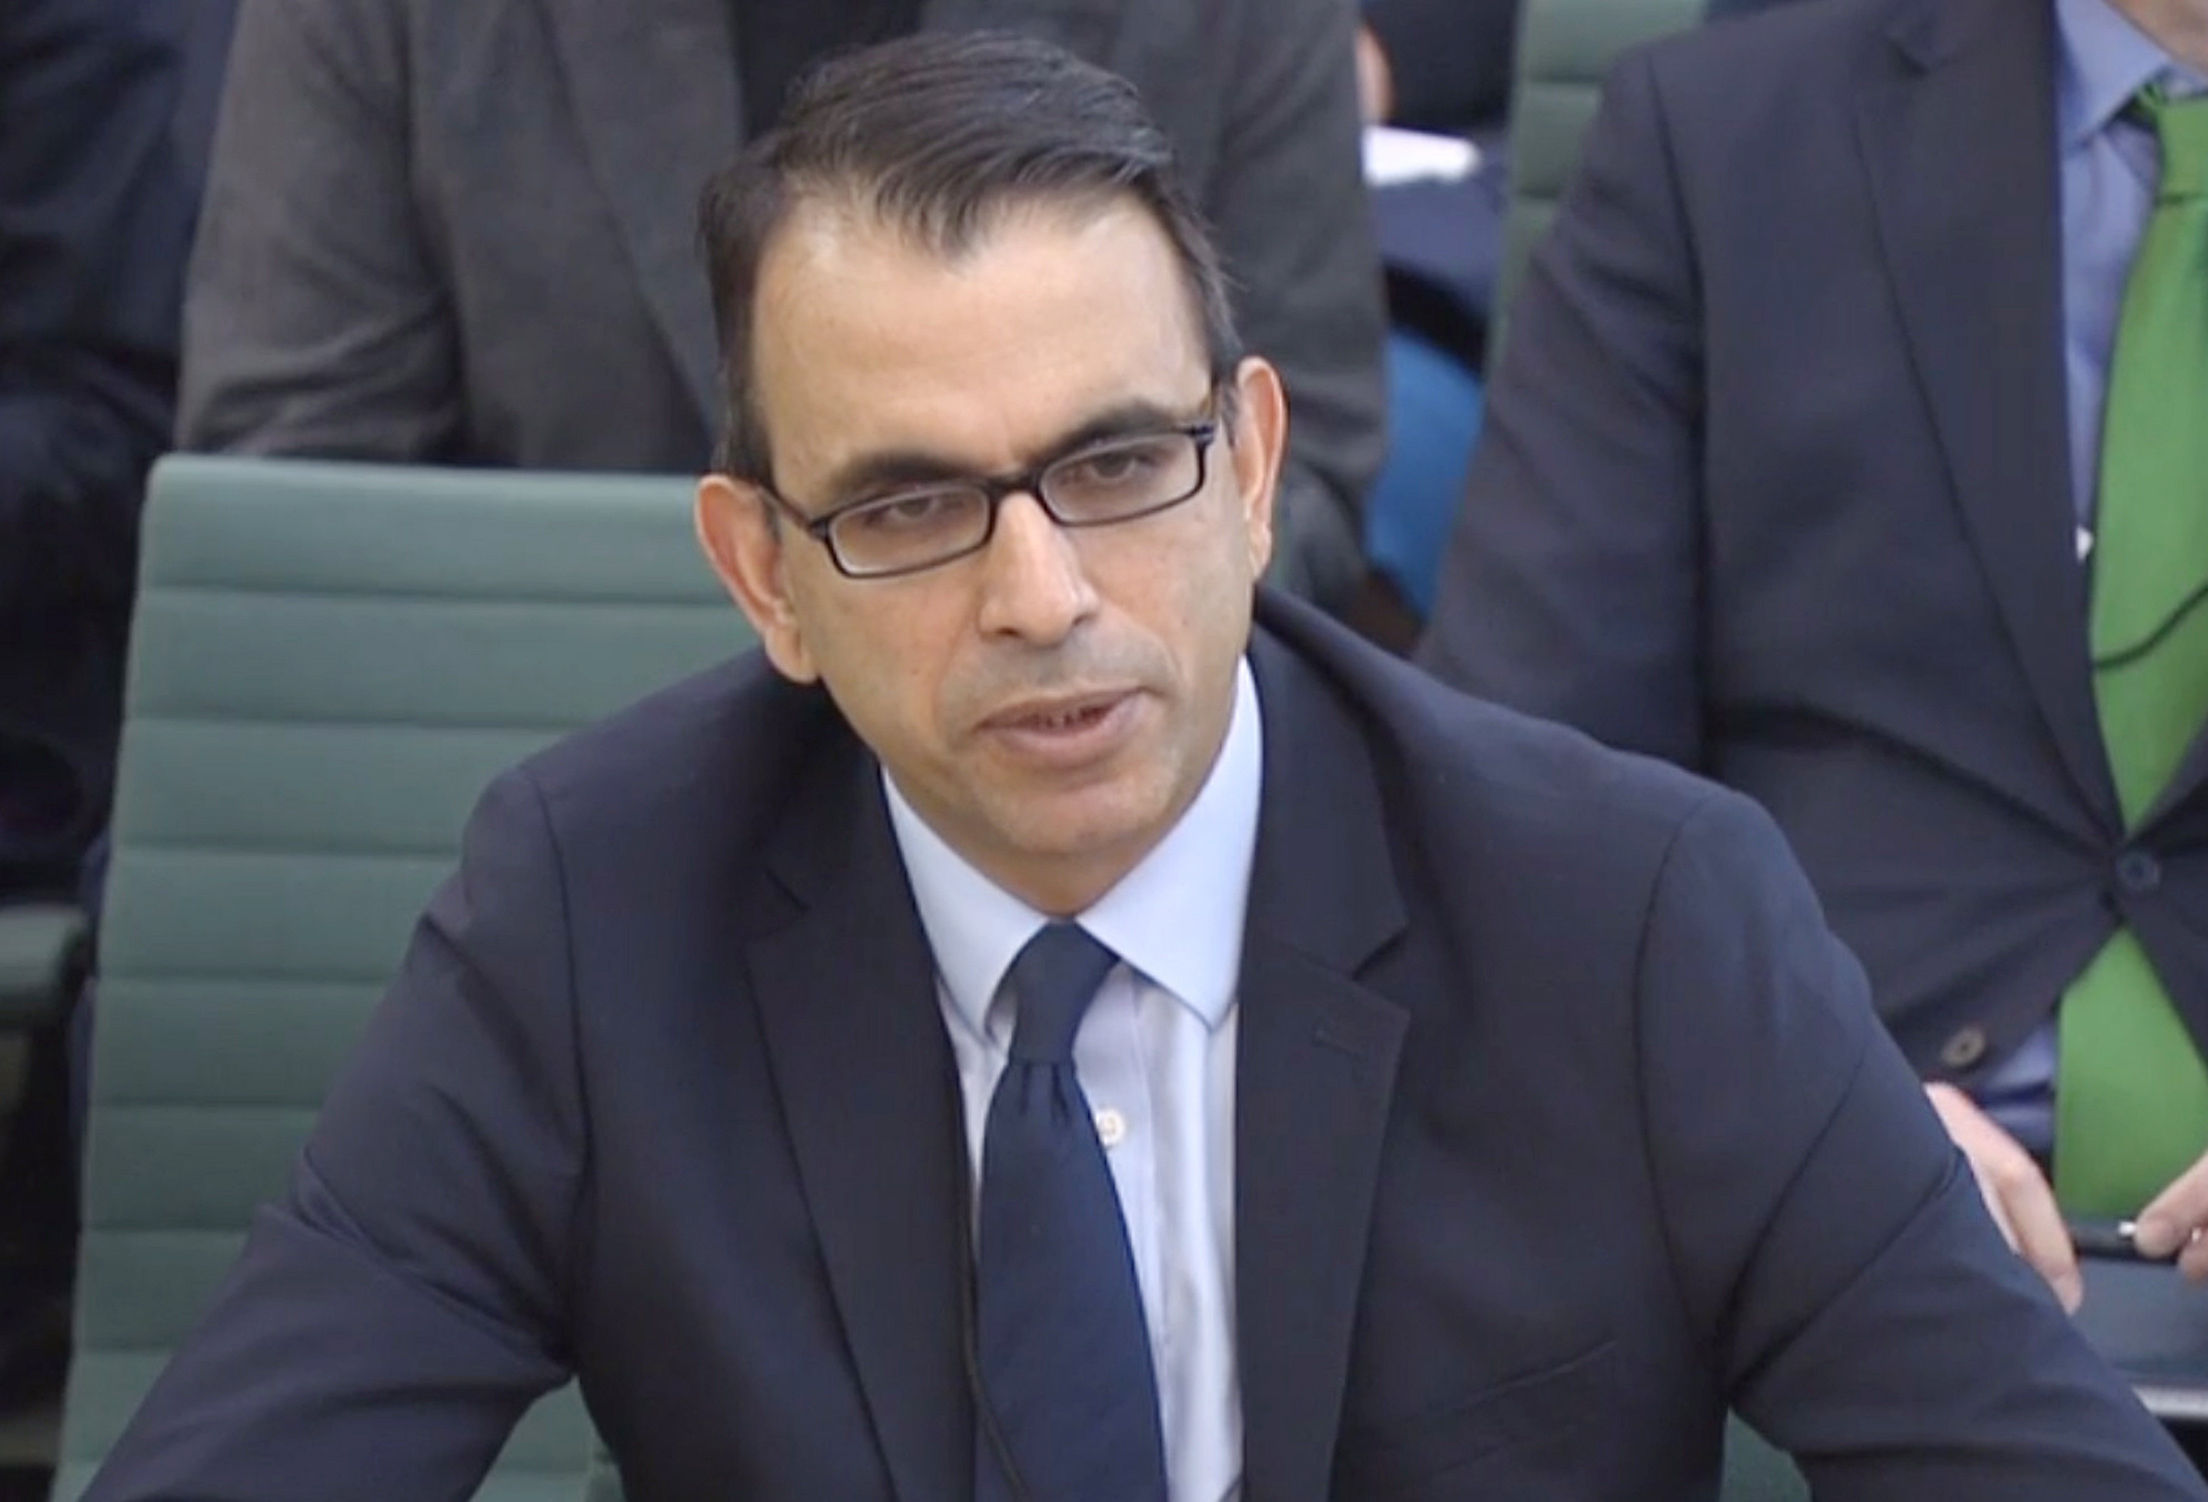 Zafar Khan answering questions at a joint hearing of the Commons Business, Energy and Industrial Strategy Committee and the Work and Pensions Committee at Portcullis House in London